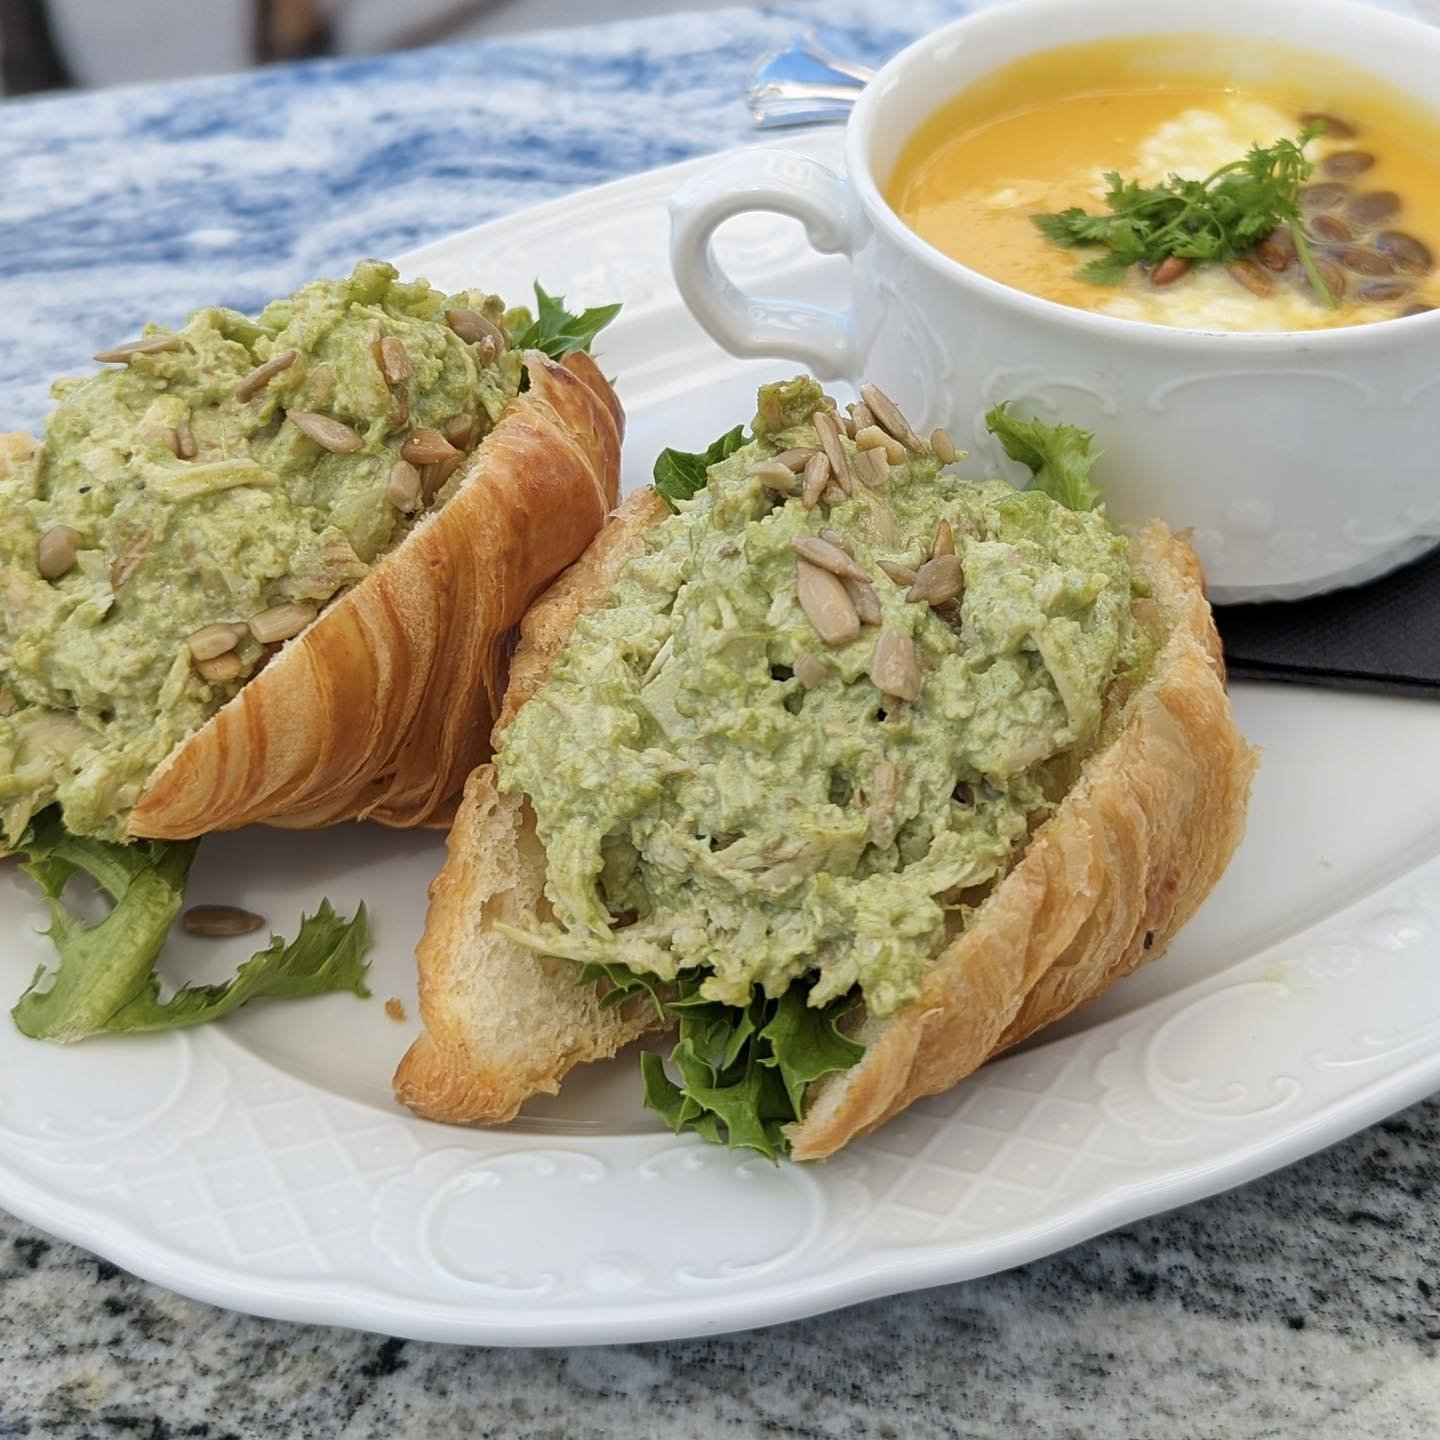 Love our Chicken Salad Croissant?! We&rsquo;ll be making mini versions for this week&rsquo;s Mother&rsquo;s Day Afternoon Tea! We&rsquo;ll also have Quiche Lorraine, Spinach &amp; Cheese Empanada, Focaccia &amp; Olive Tapenade, and Egg, Avocado, and 